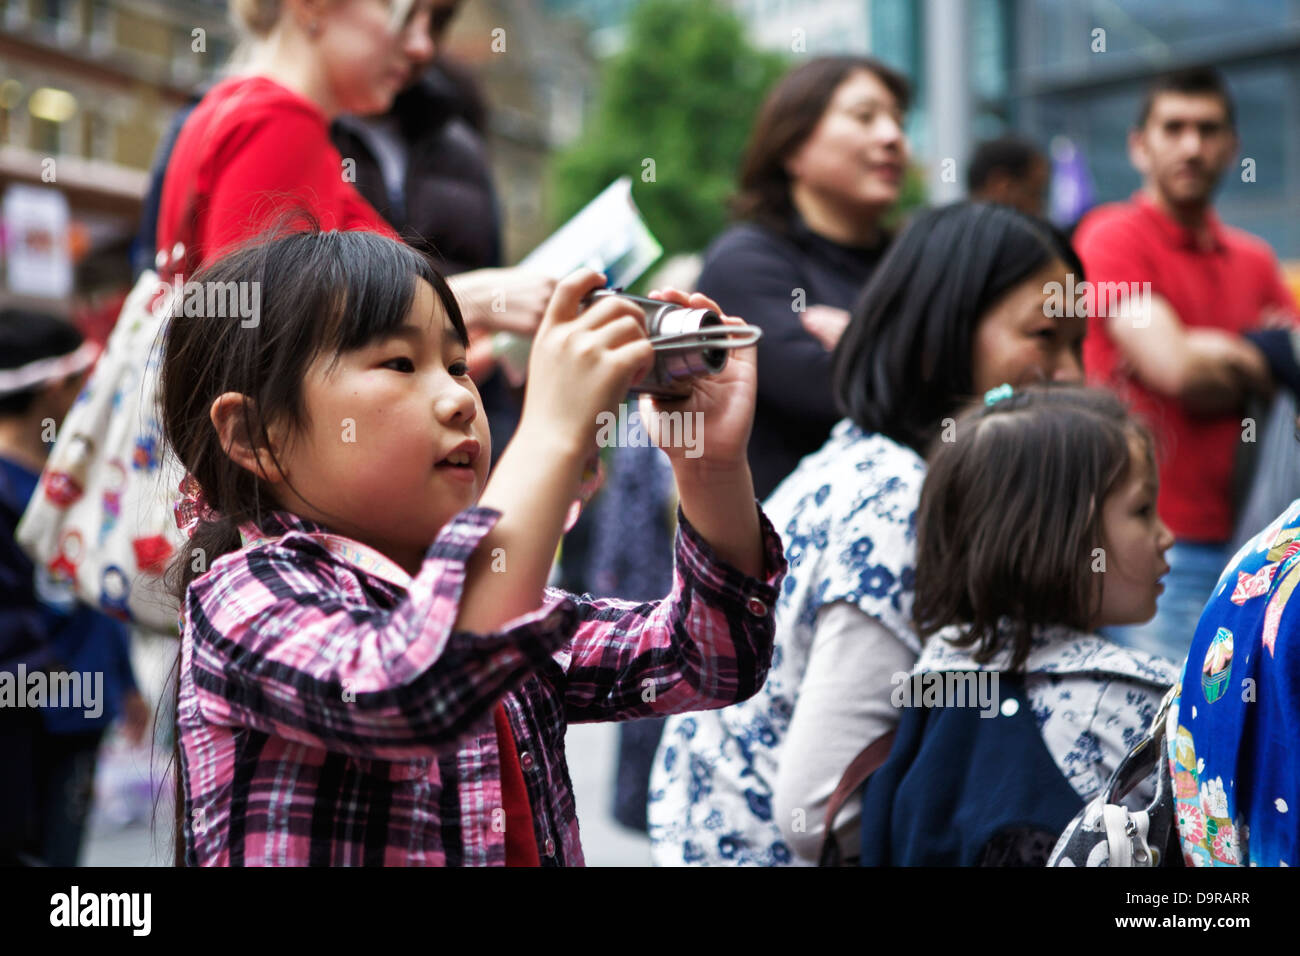 Young Japanese girl with camera taking a photo Stock Photo